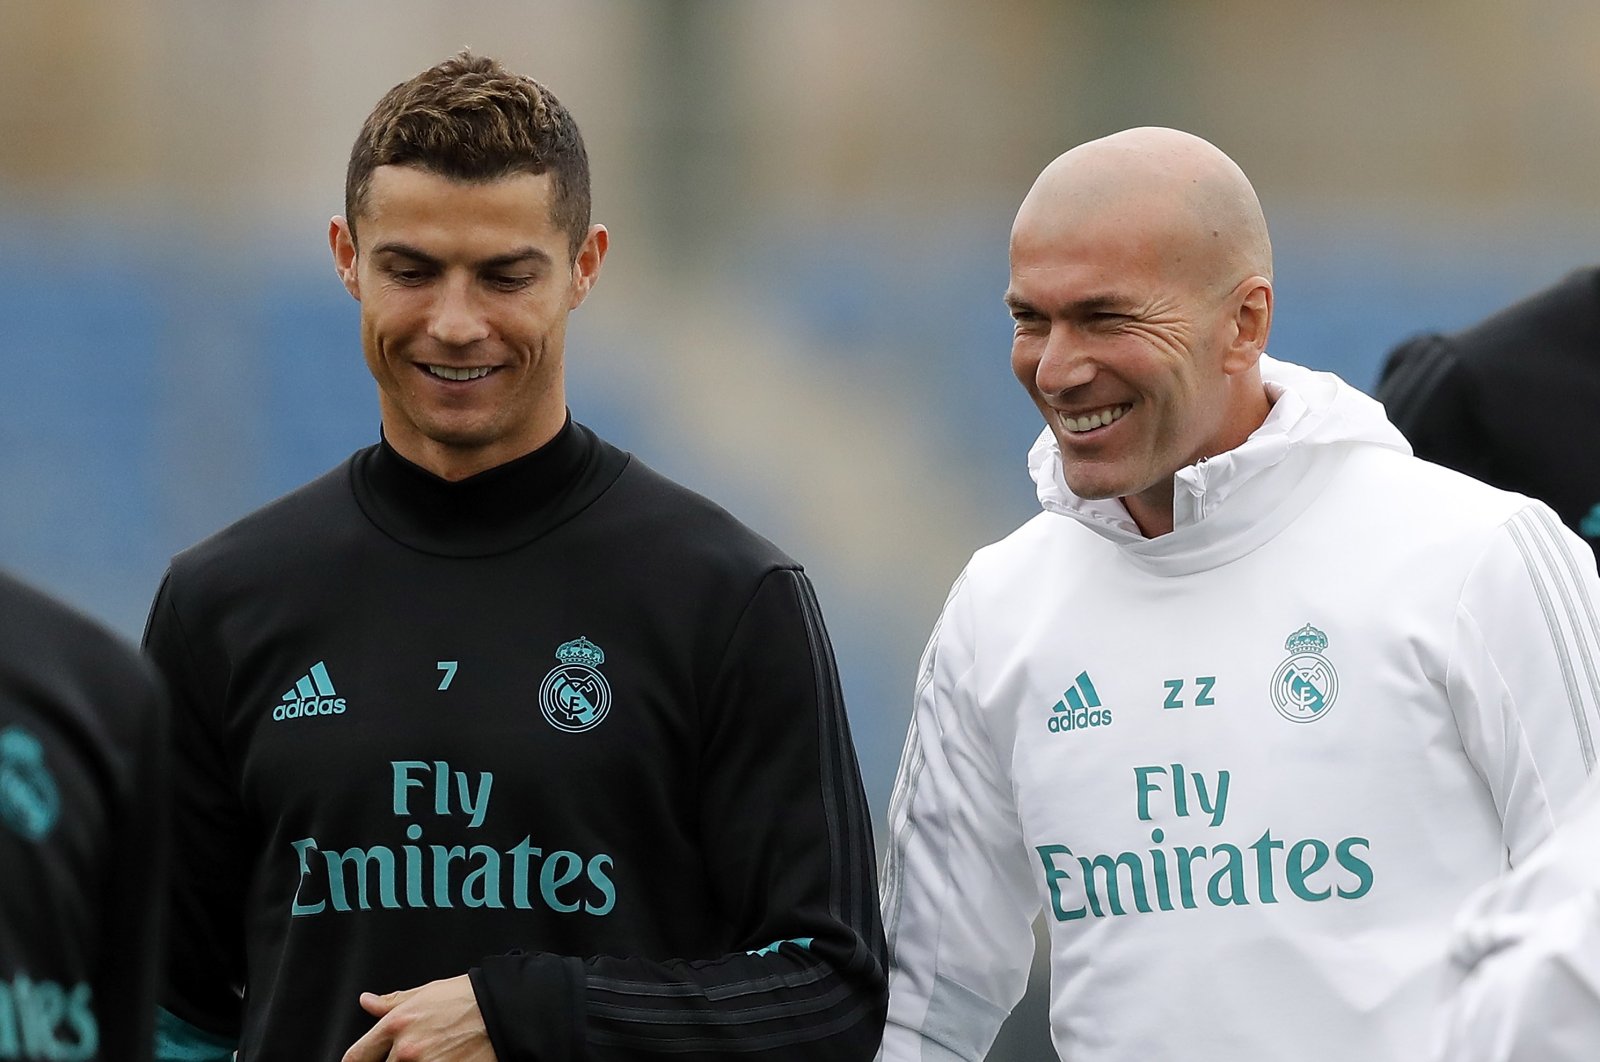 This file photo shows Cristiano Ronaldo (L) and head coach Zinedine Zidane at Real Madrid during a training session at Valdebebas training ground, Madrid, Spain, Nov. 24, 2017. (Getty Images Photo)